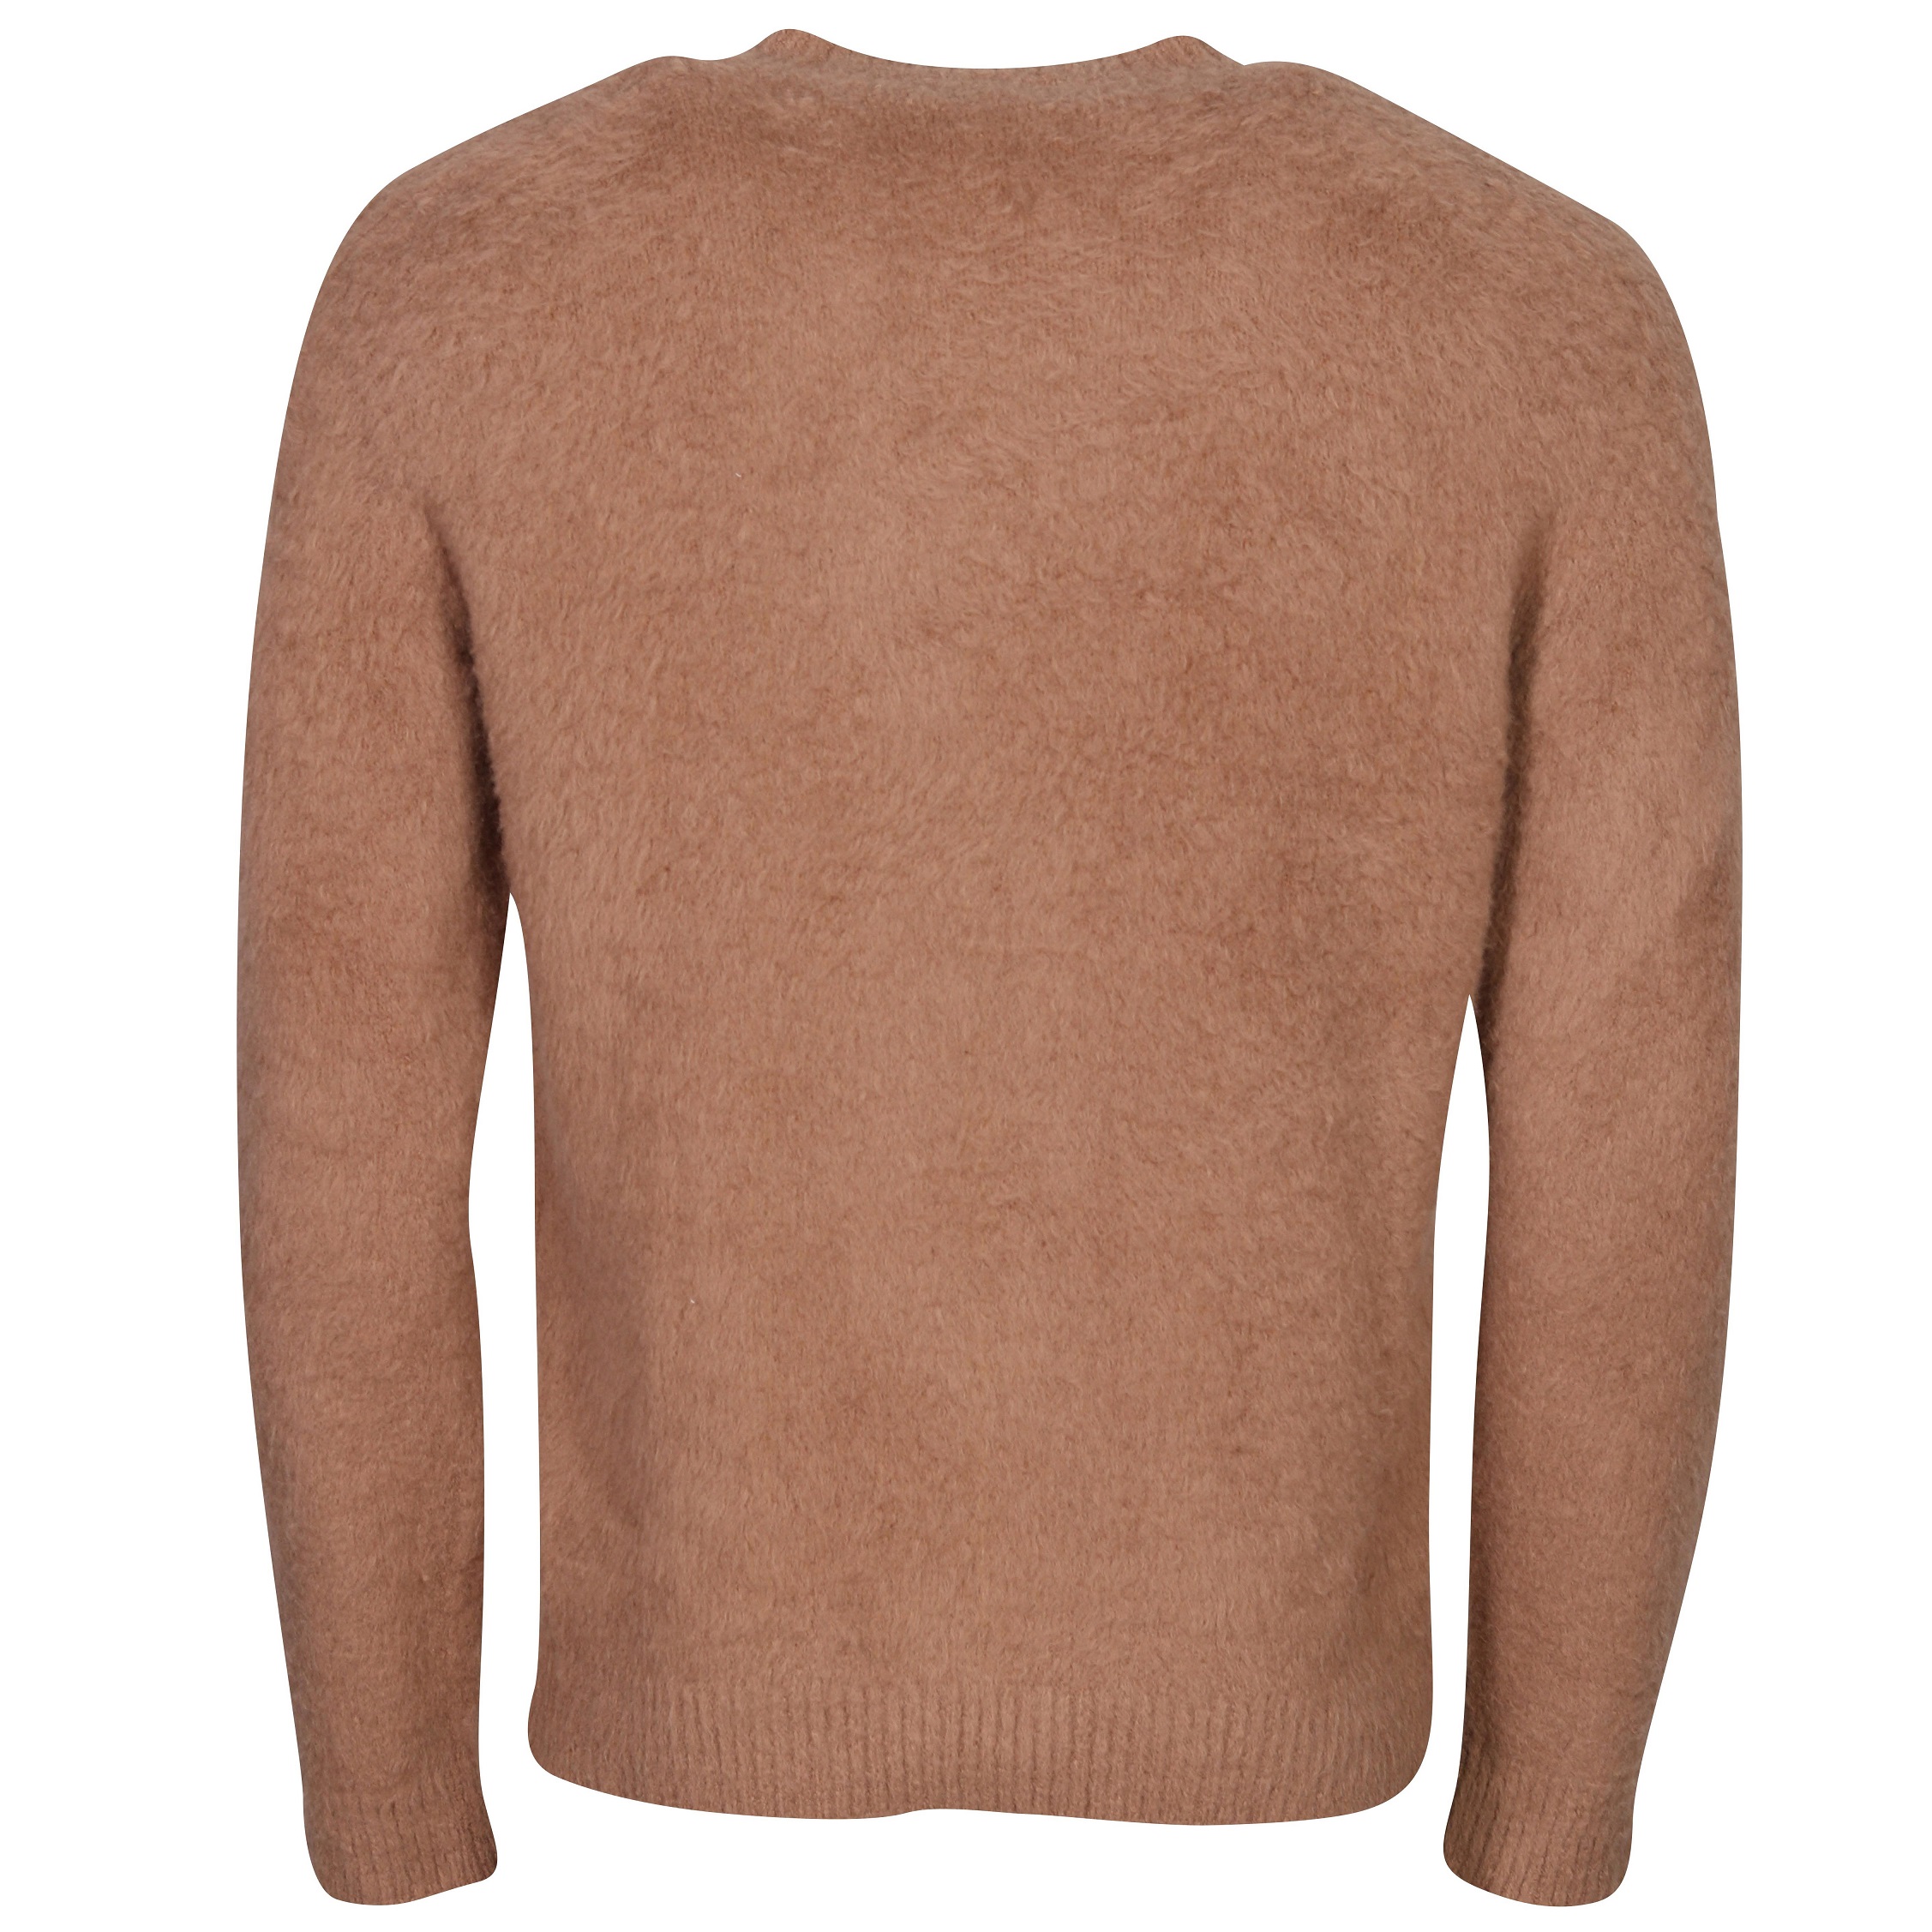 Roberto Collina Cotton Fluffy Knit Pullover in Camel 48